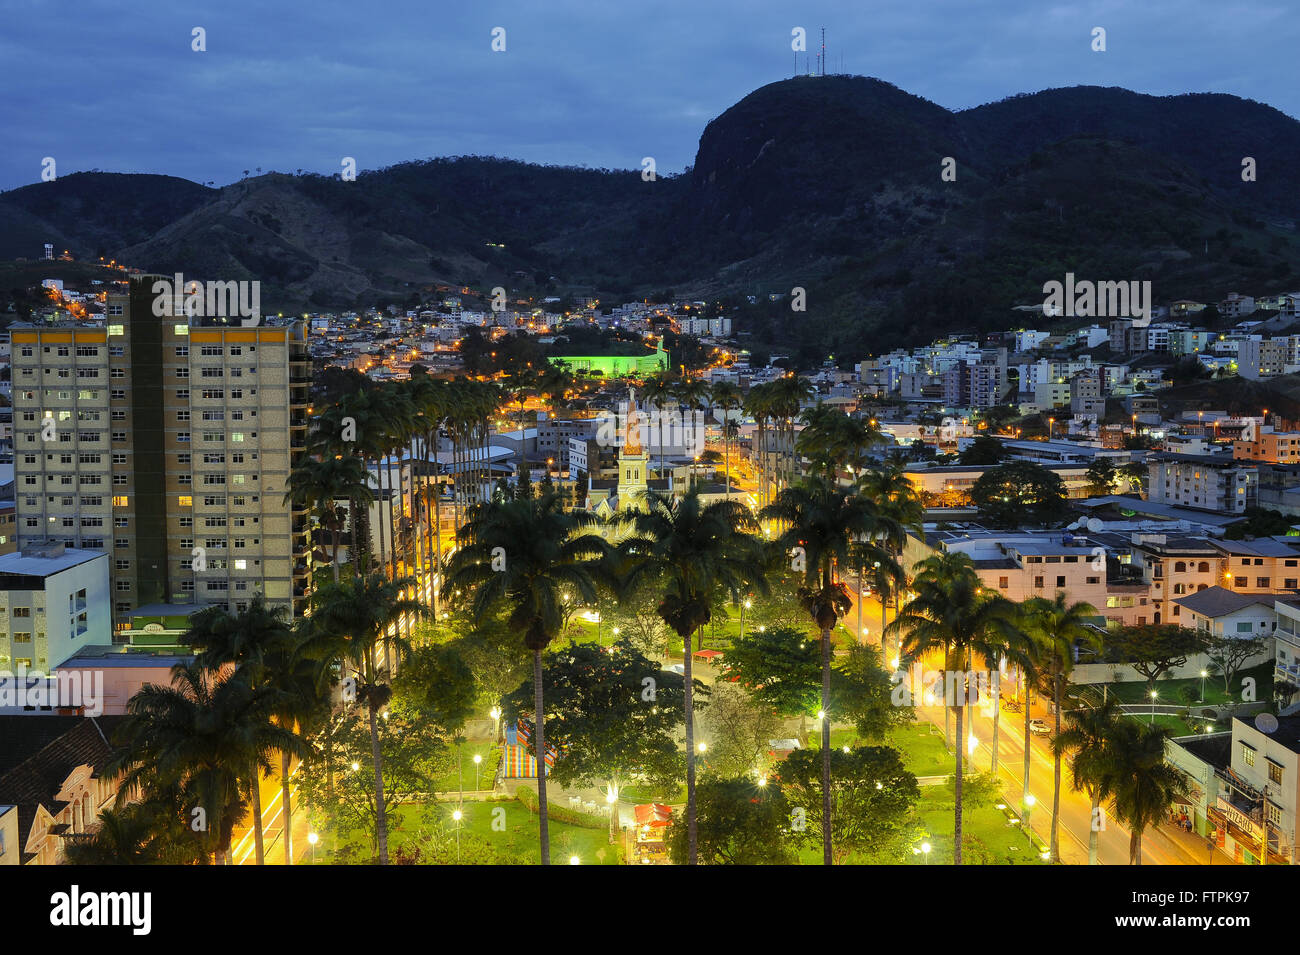 Landscape at dusk in the city of Caratinga center in Minas Gerais Stock Photo